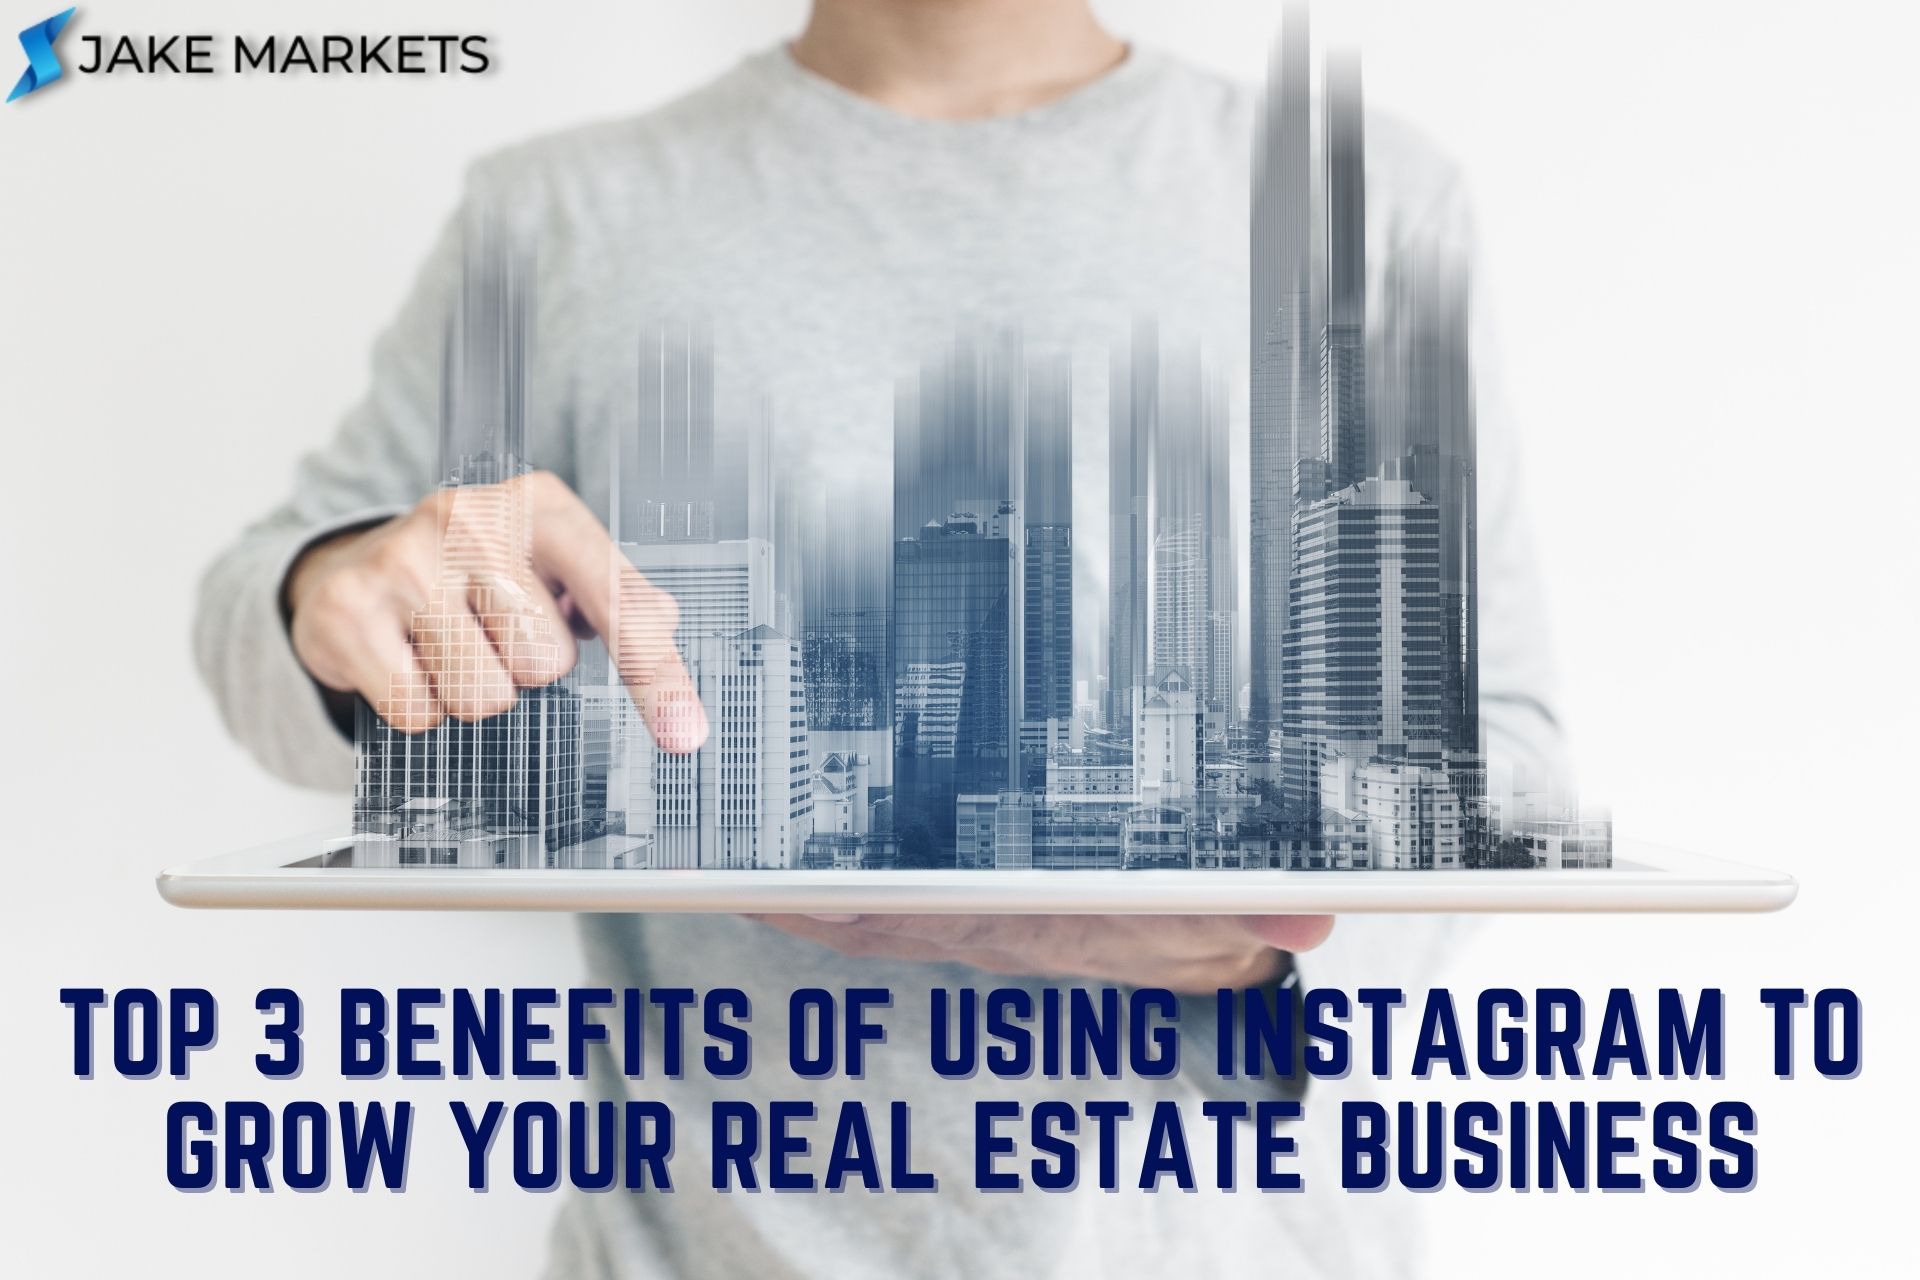 Top 3 Benefits Of Using Instagram To Grow Your Real Estate Business